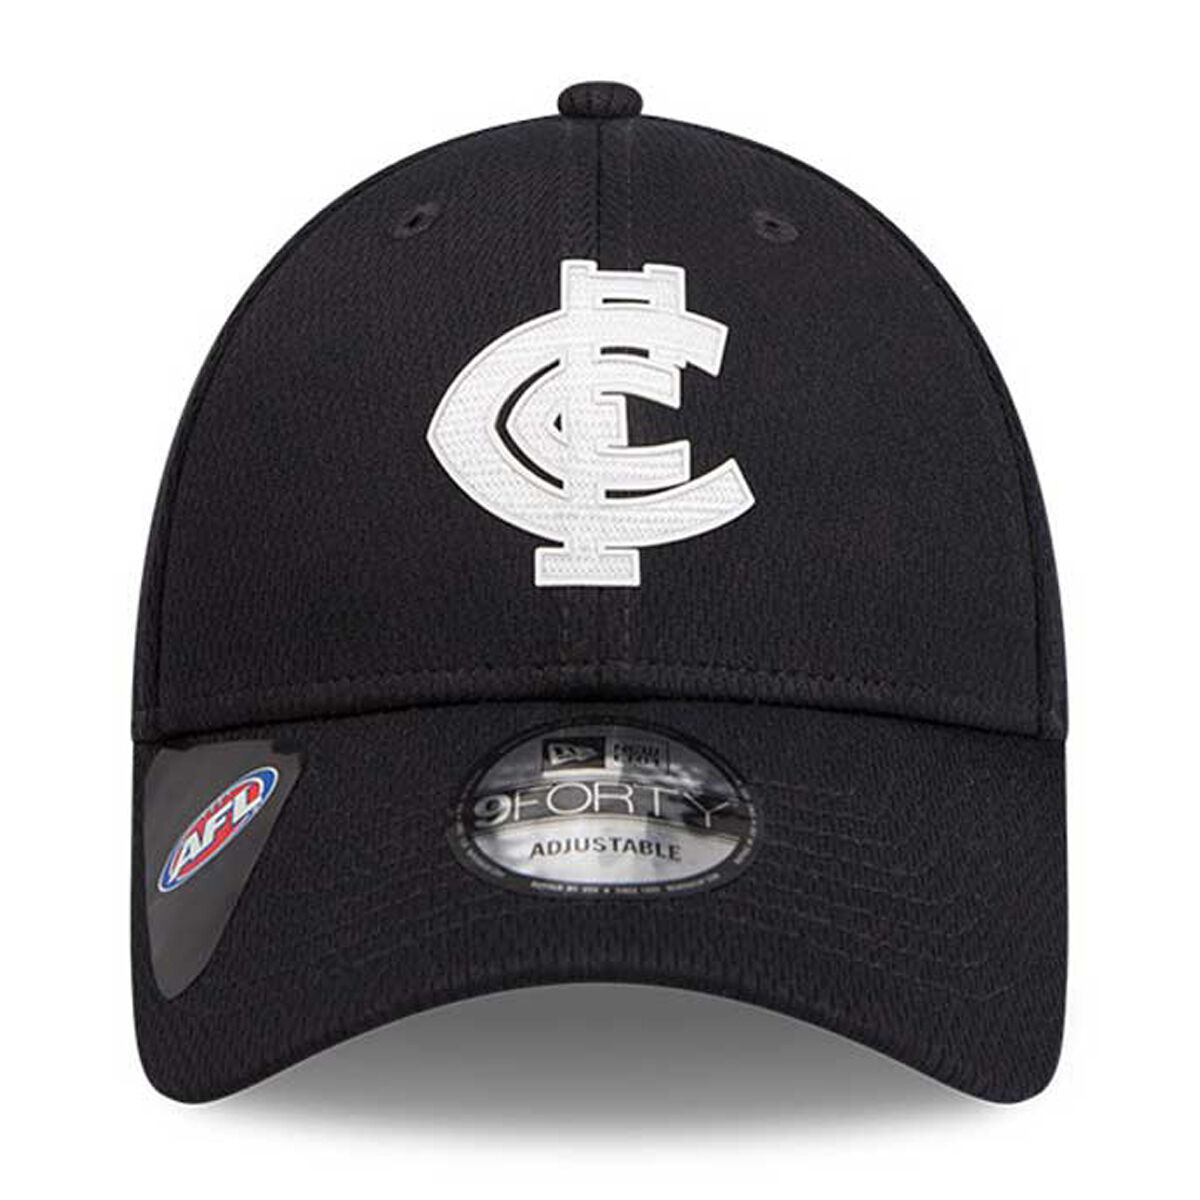 other-rugby-union-equipment-carlton-blues-member-cap-hat-2015-new-rare